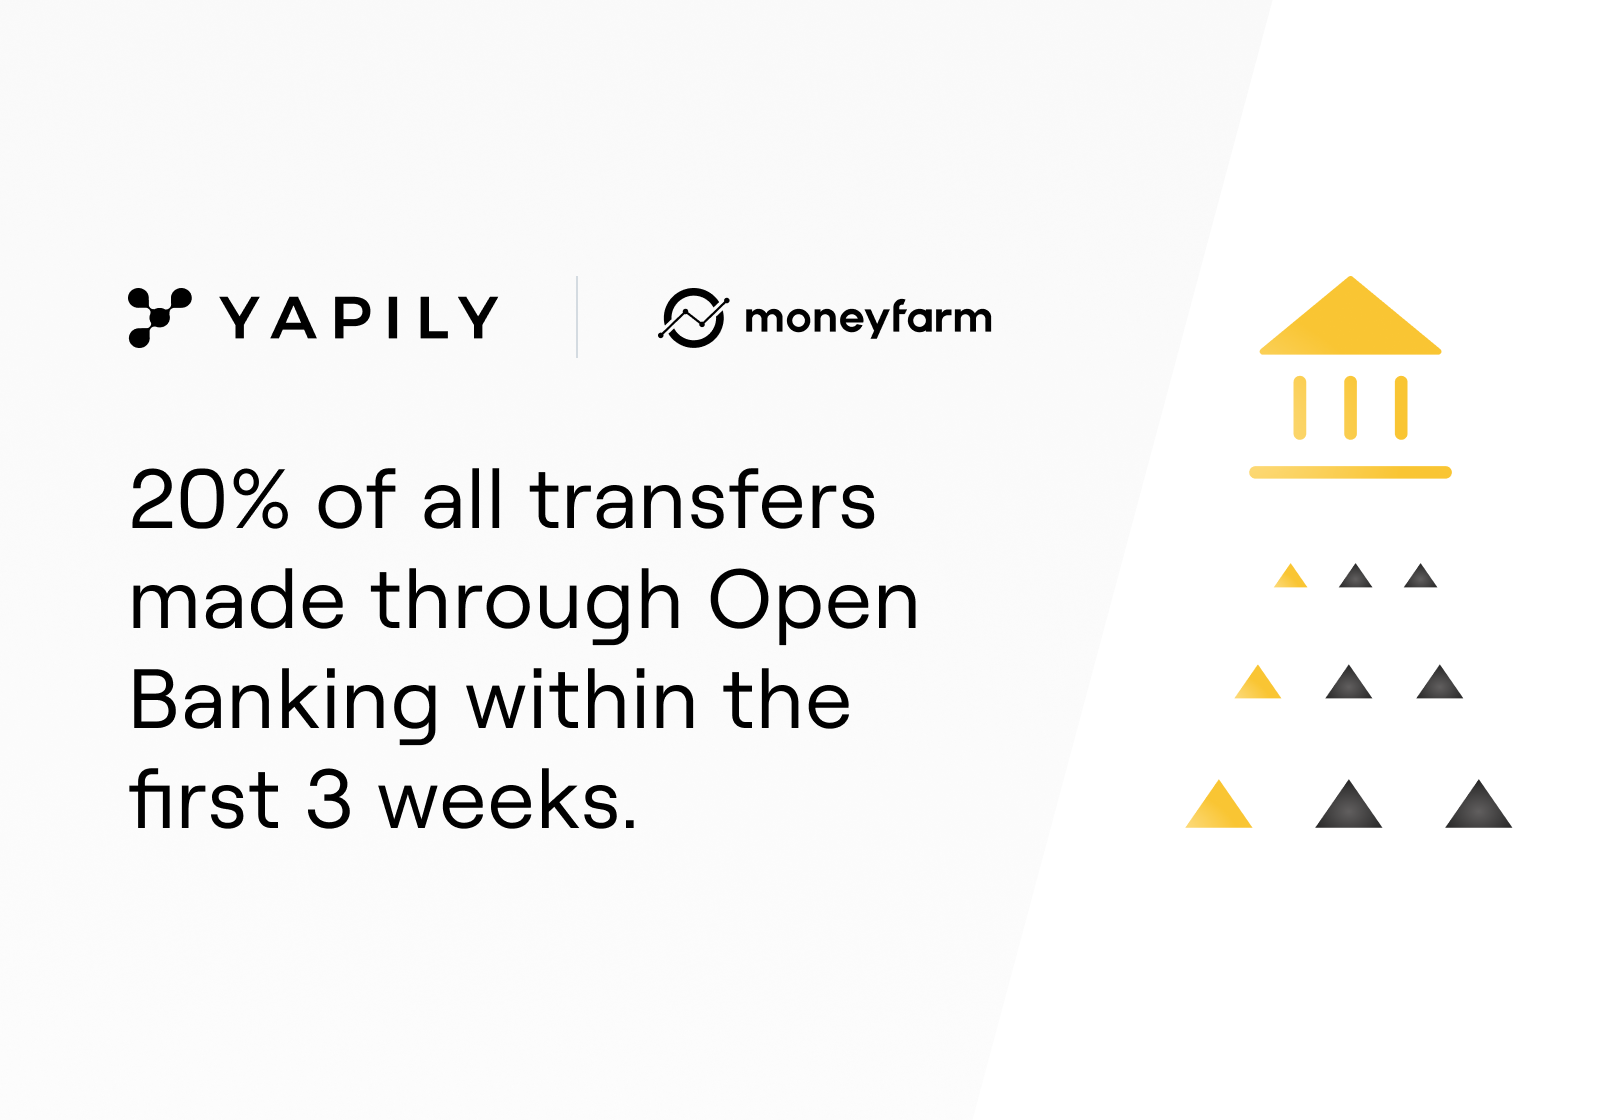 Europe’s leading digital wealth manager, Moneyfarm, has gone live with open banking, thanks to a recent partnership with leading enterprise connectivity platform, Yapily.